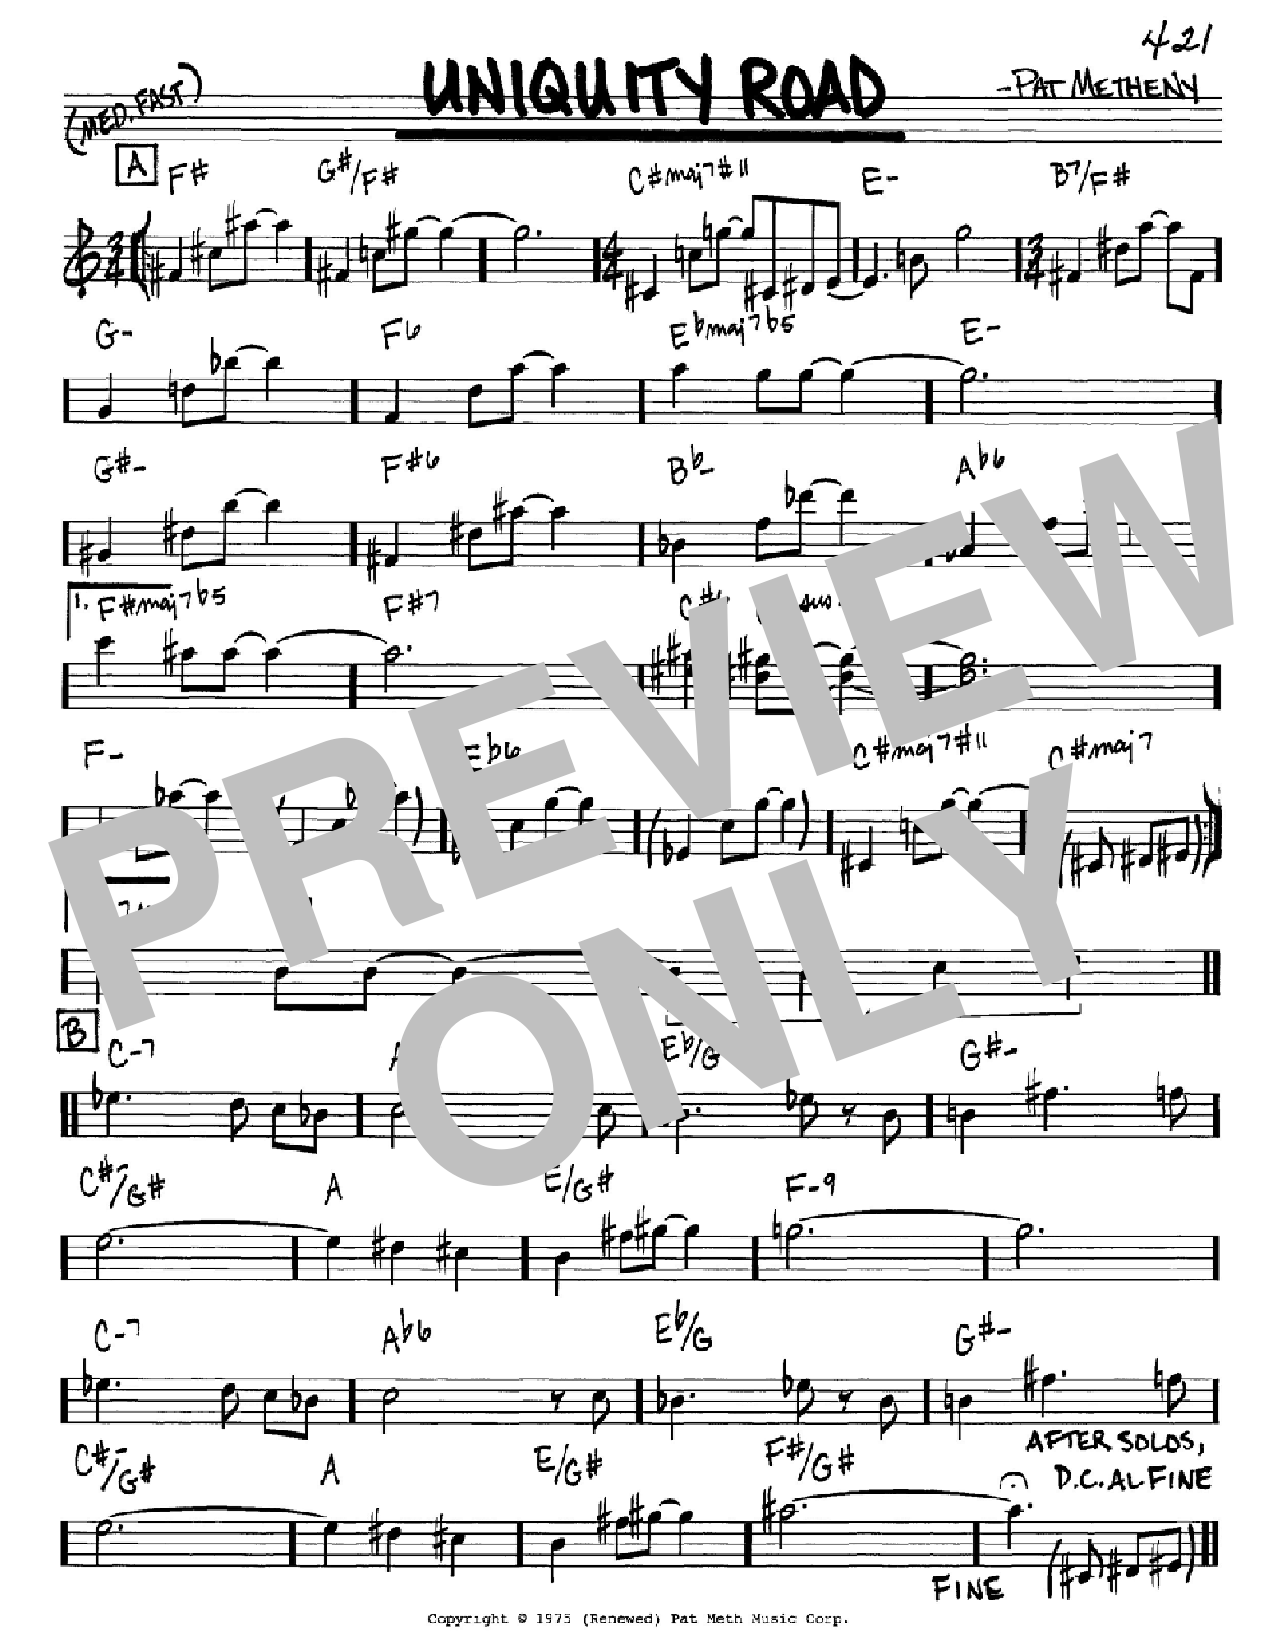 Download Pat Metheny Uniquity Road Sheet Music